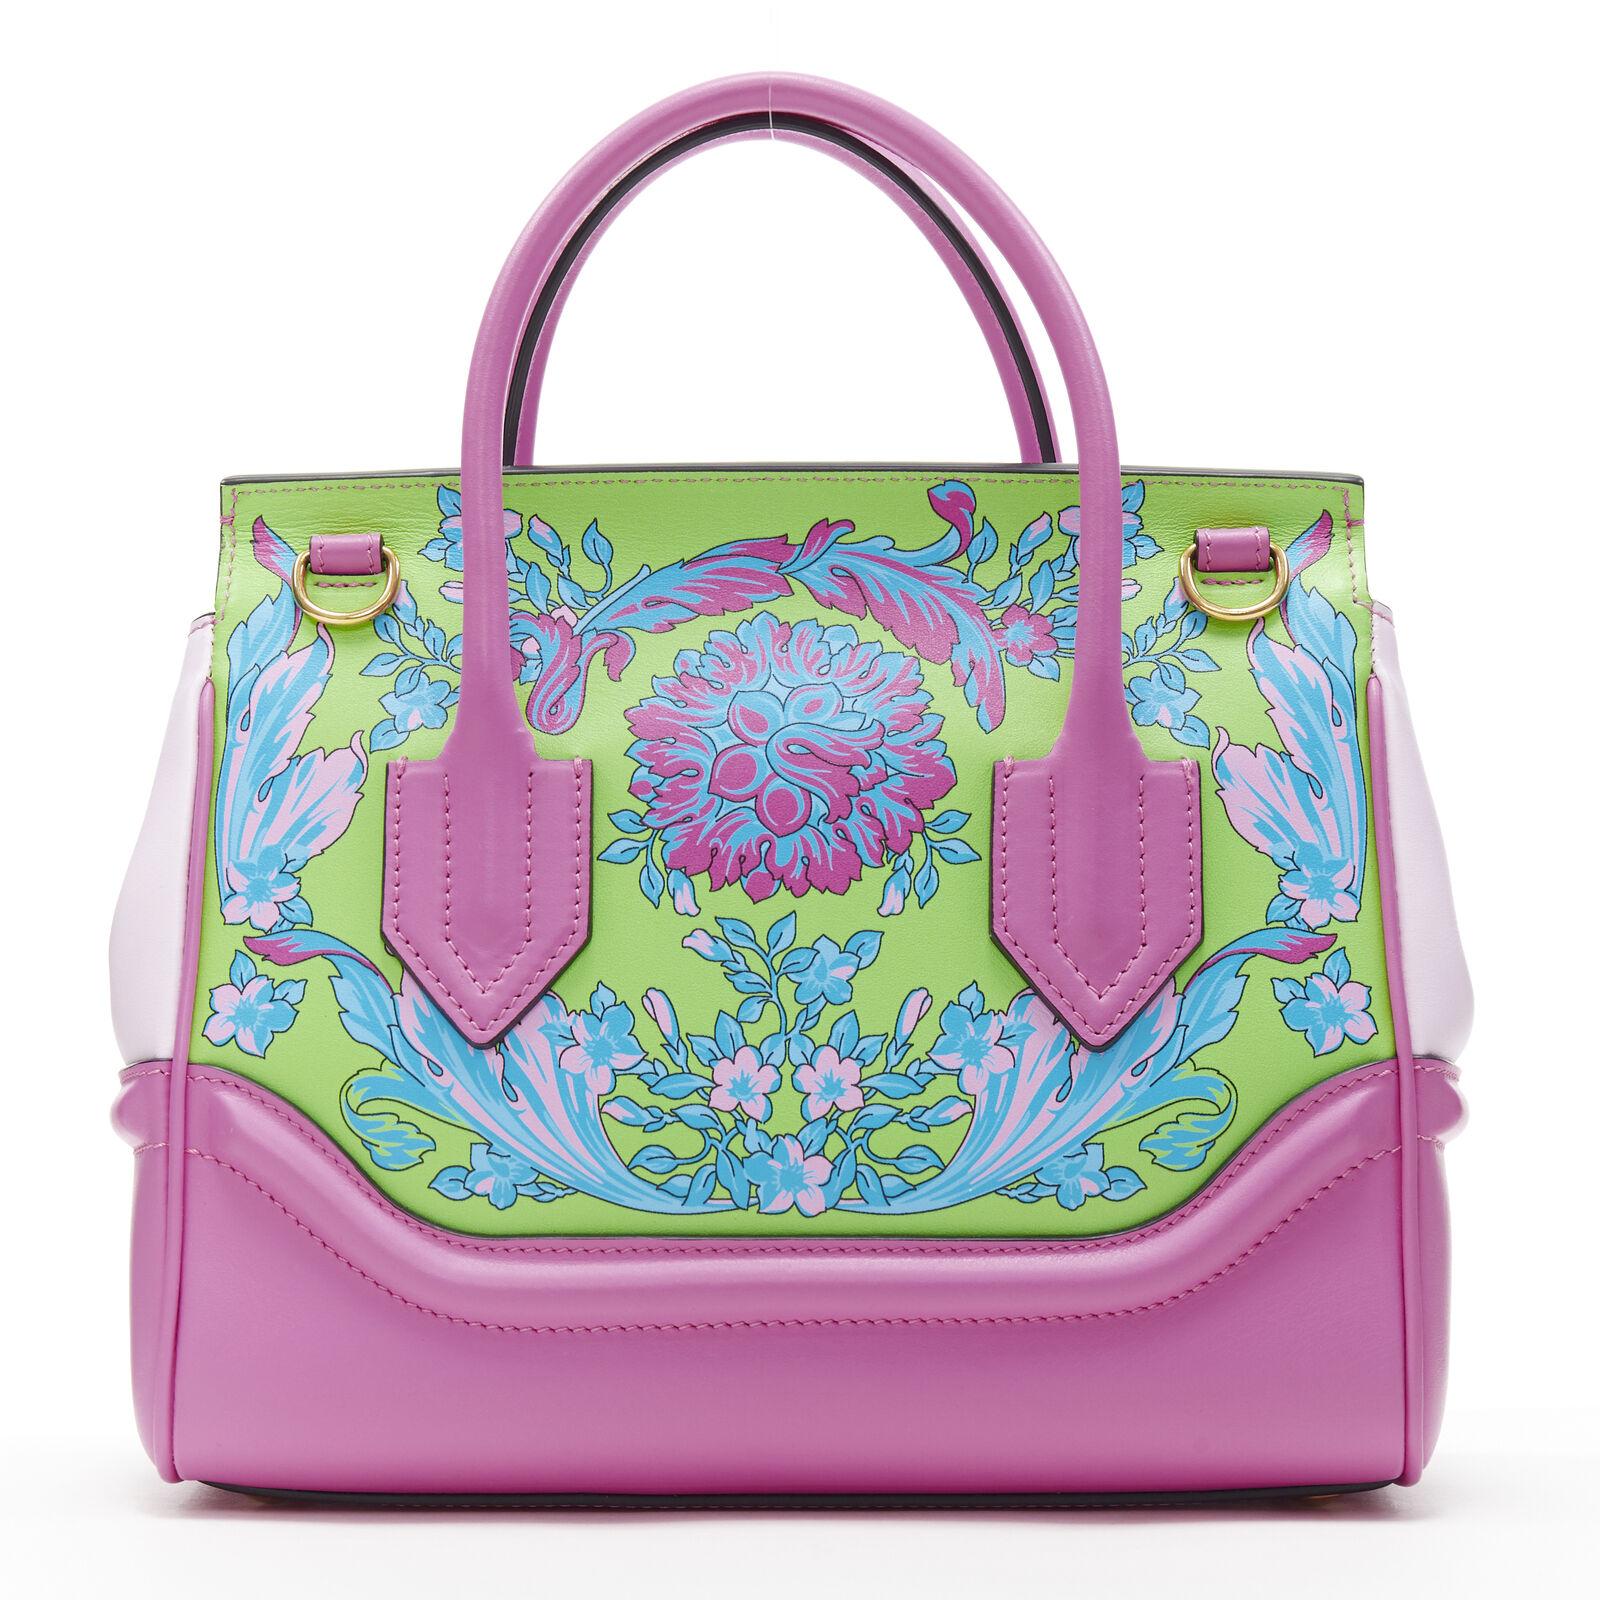 VERSACE

 Palazzo Empire Small Technicolor Baroque pink Medusa tote bag
Brand: Versace
Designer: Donatella Versace
Collection: 2019
Model Name / Style: Palazzo Empire
Material: Leather
Color: Pink
Pattern: Floral
Closure: Clasp
Lining material: